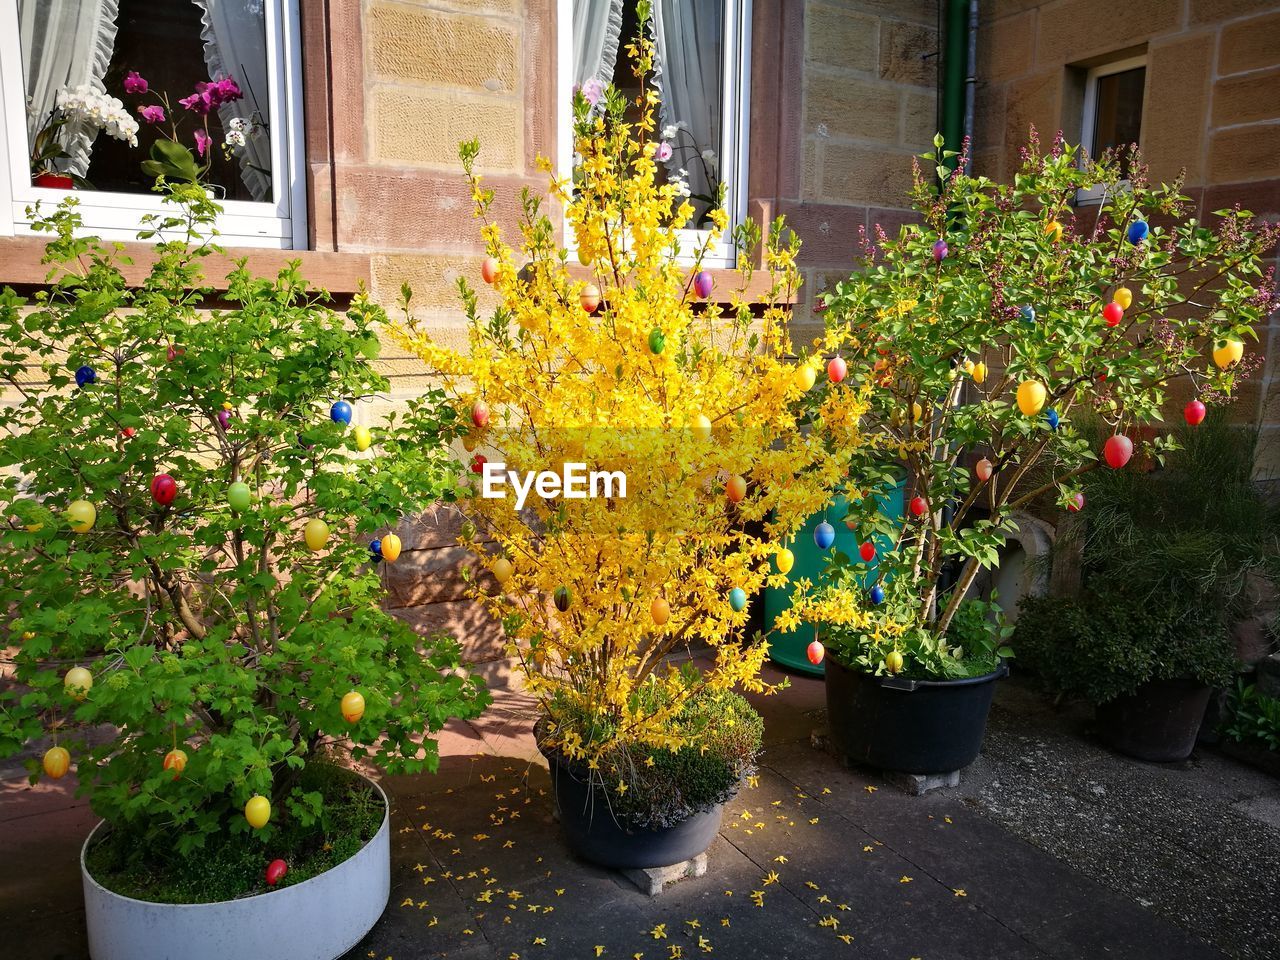 POTTED PLANTS AND YELLOW FLOWERS ON PLANT